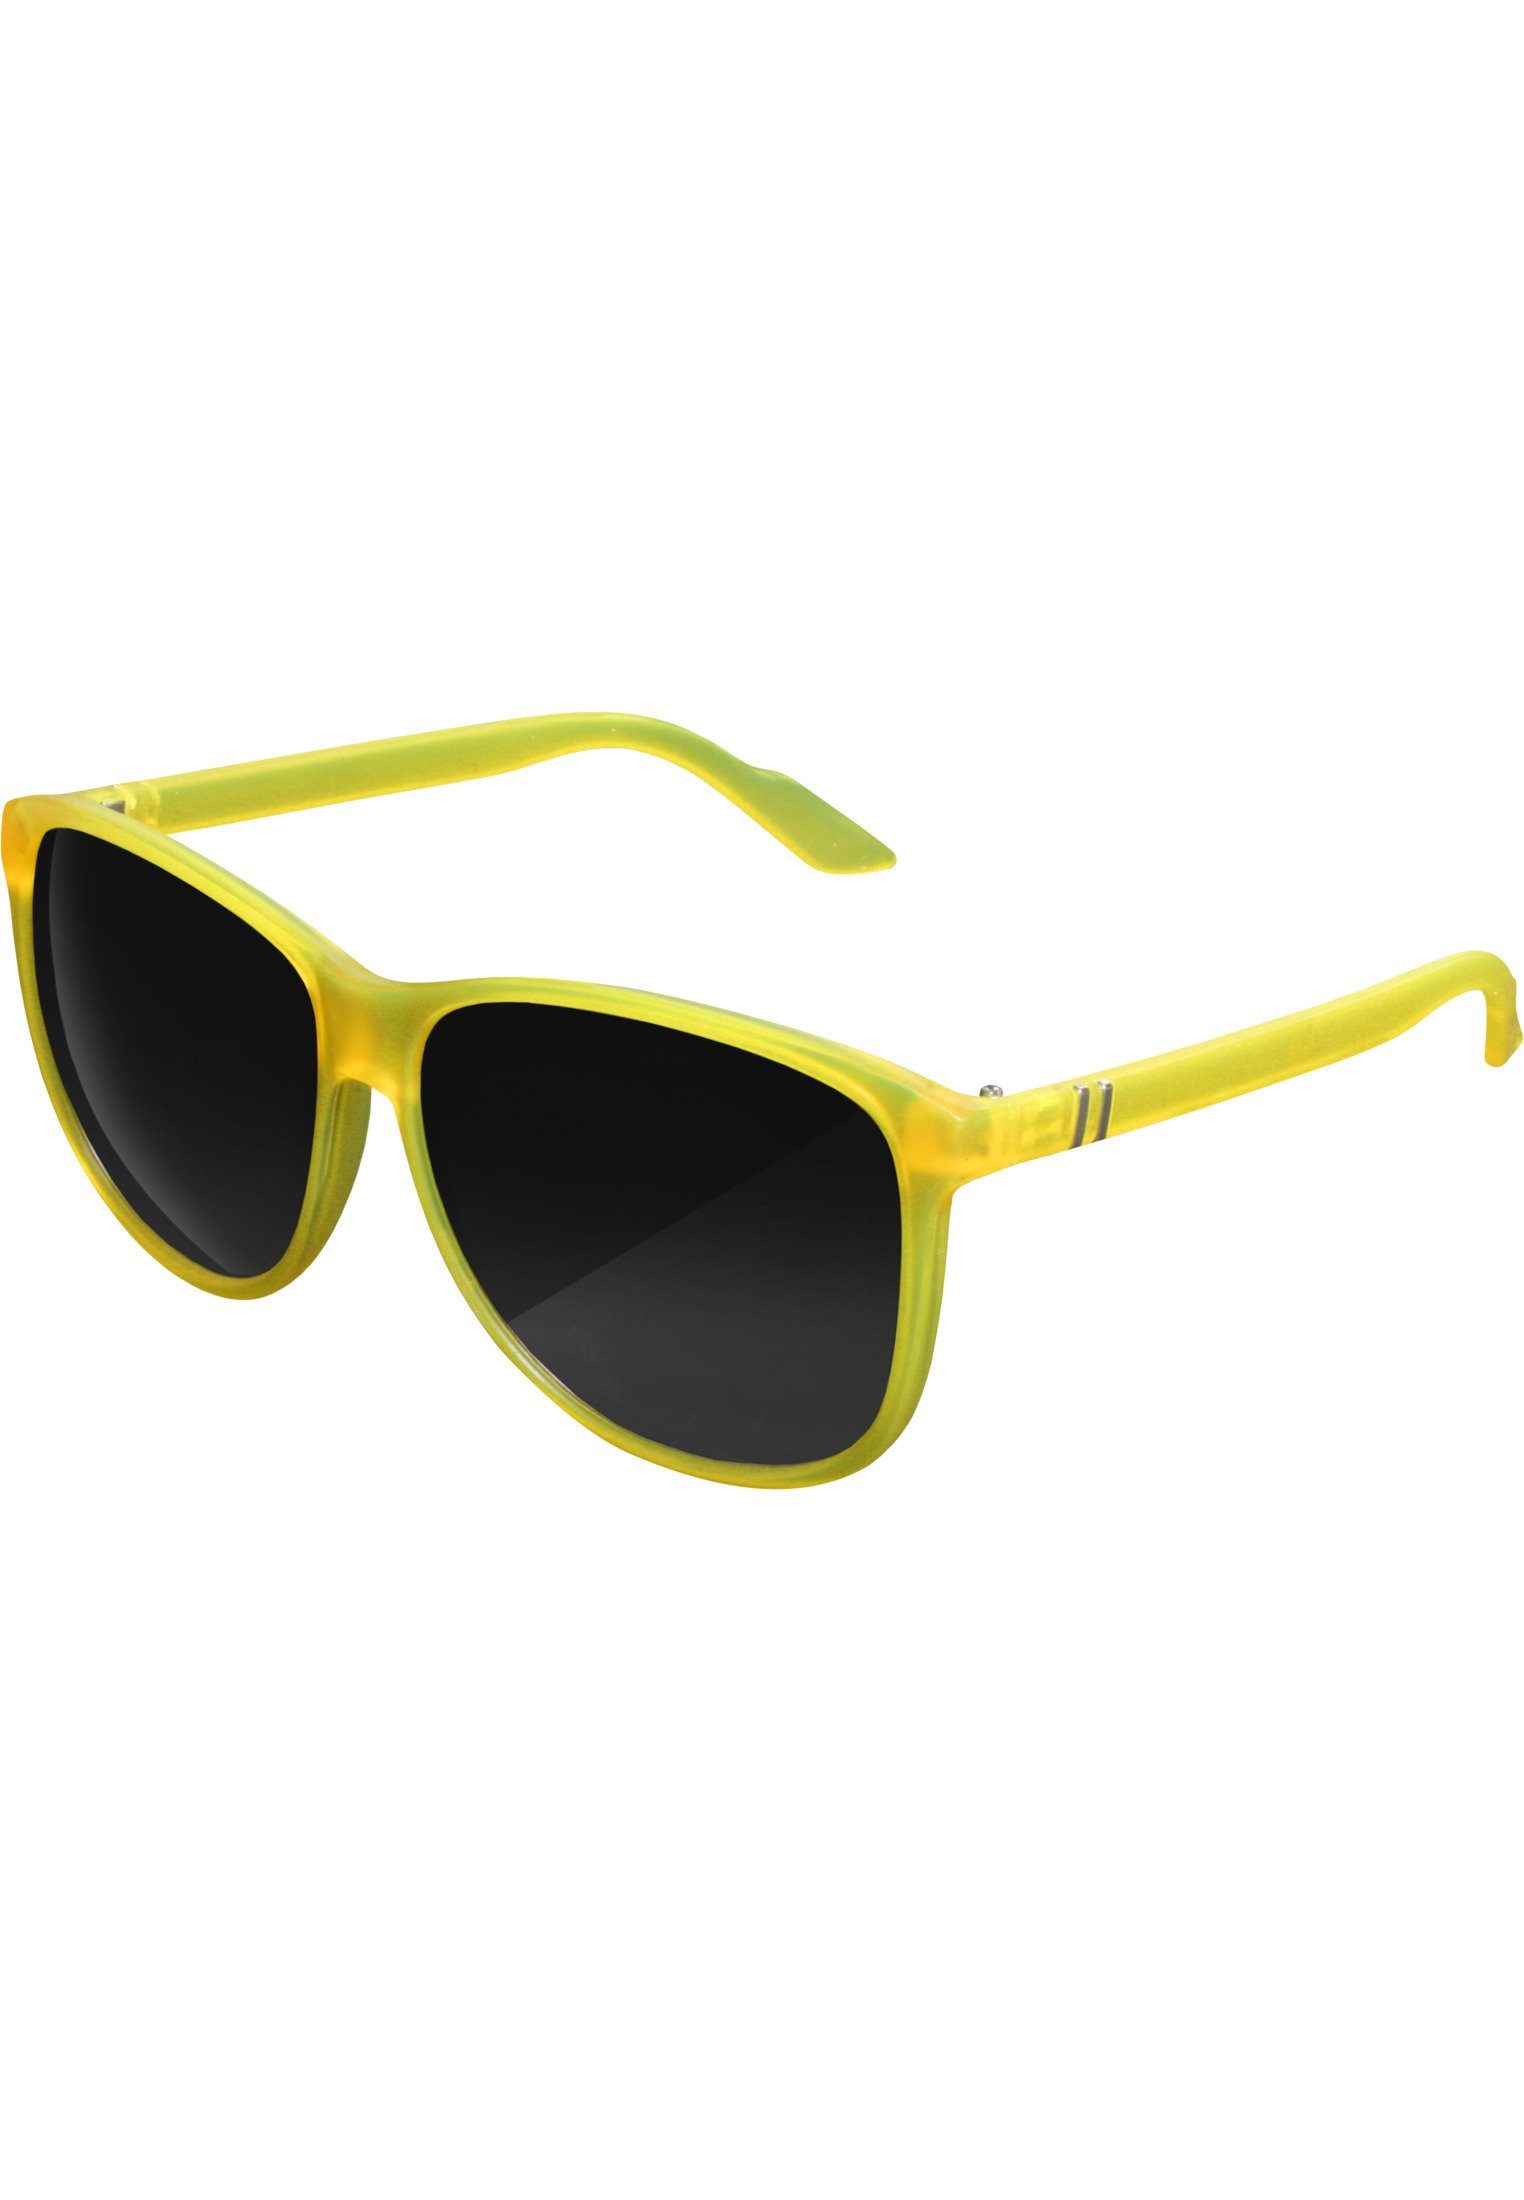 Accessoires Sonnenbrille Sunglasses Chirwa MSTRDS neonyellow